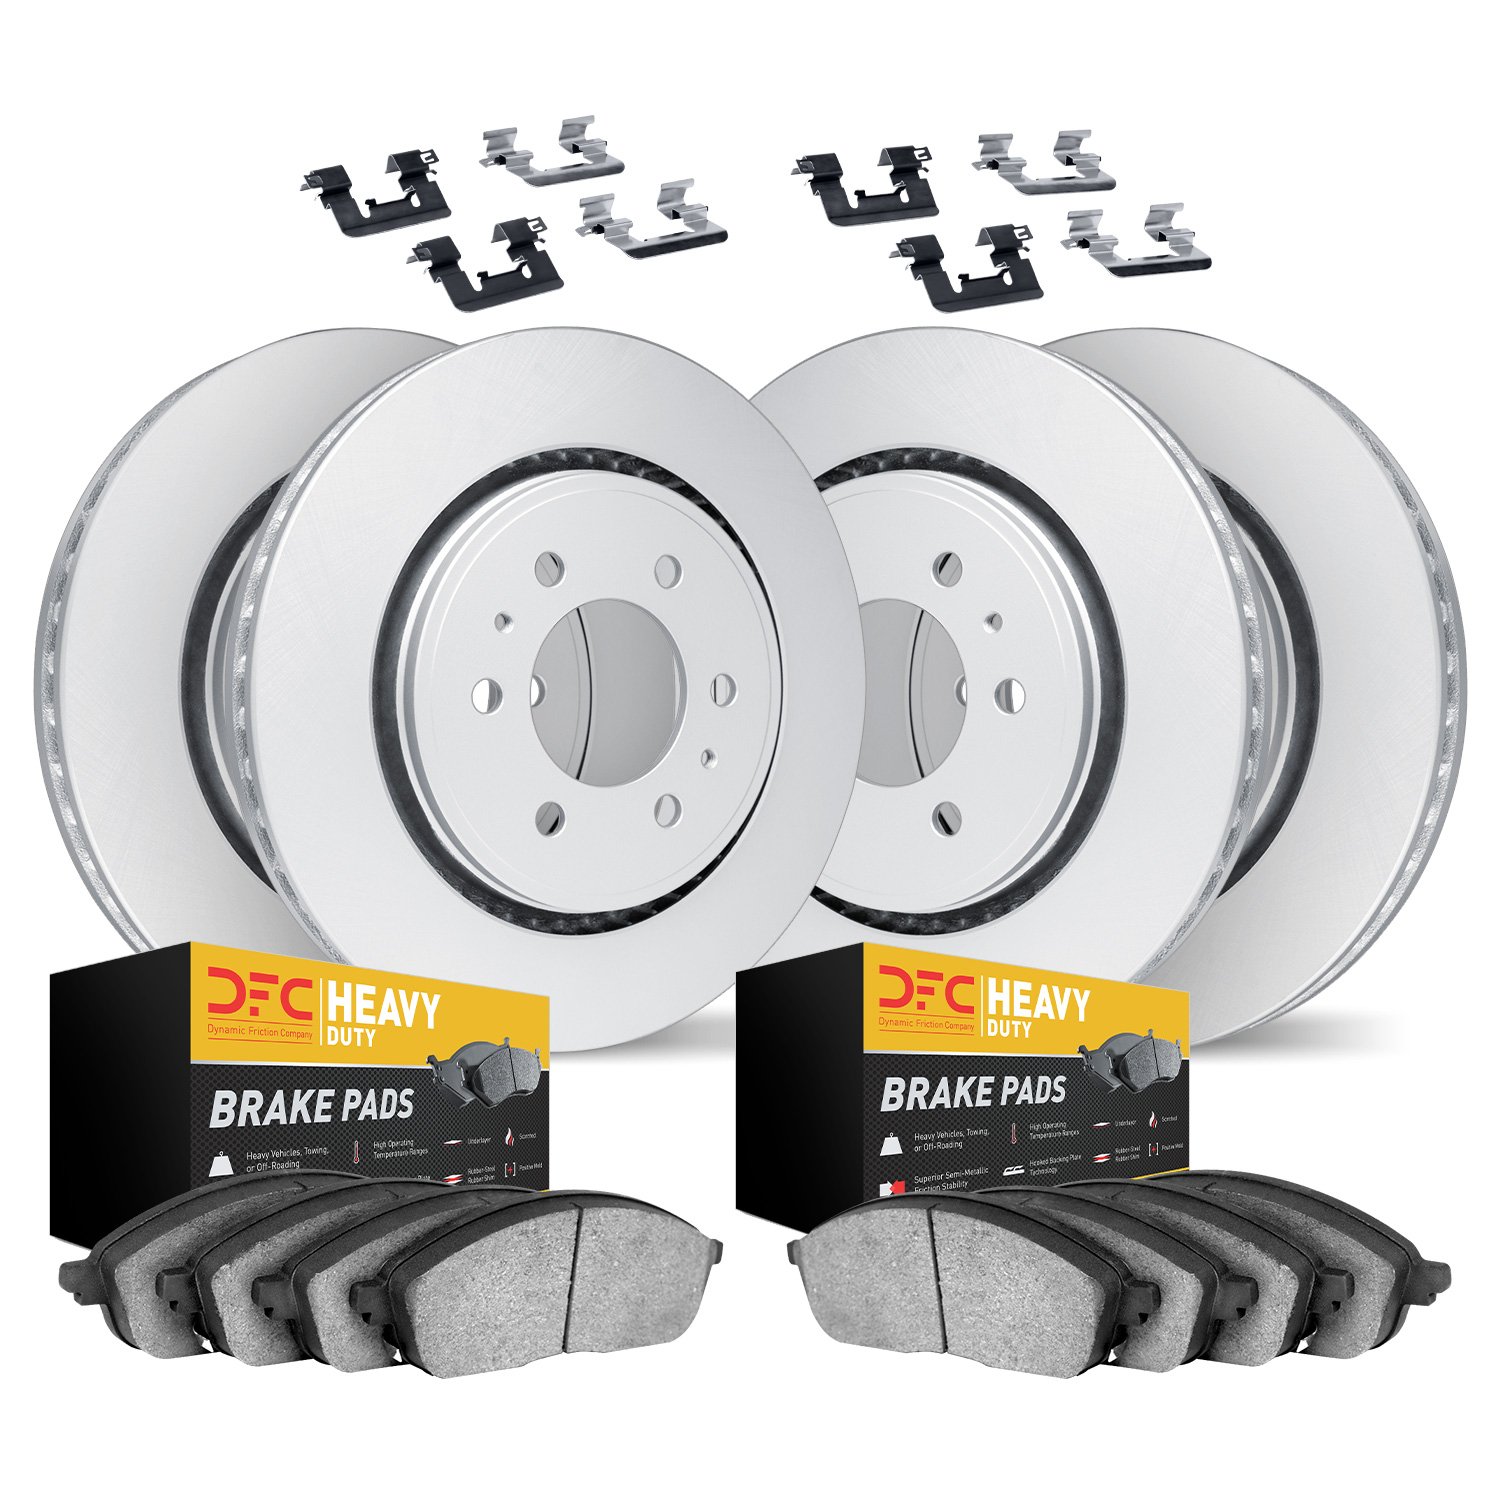 4214-40090 Geospec Brake Rotors w/Heavy-Duty Brake Pads & Hardware, Fits Select Multiple Makes/Models, Position: Front and Rear